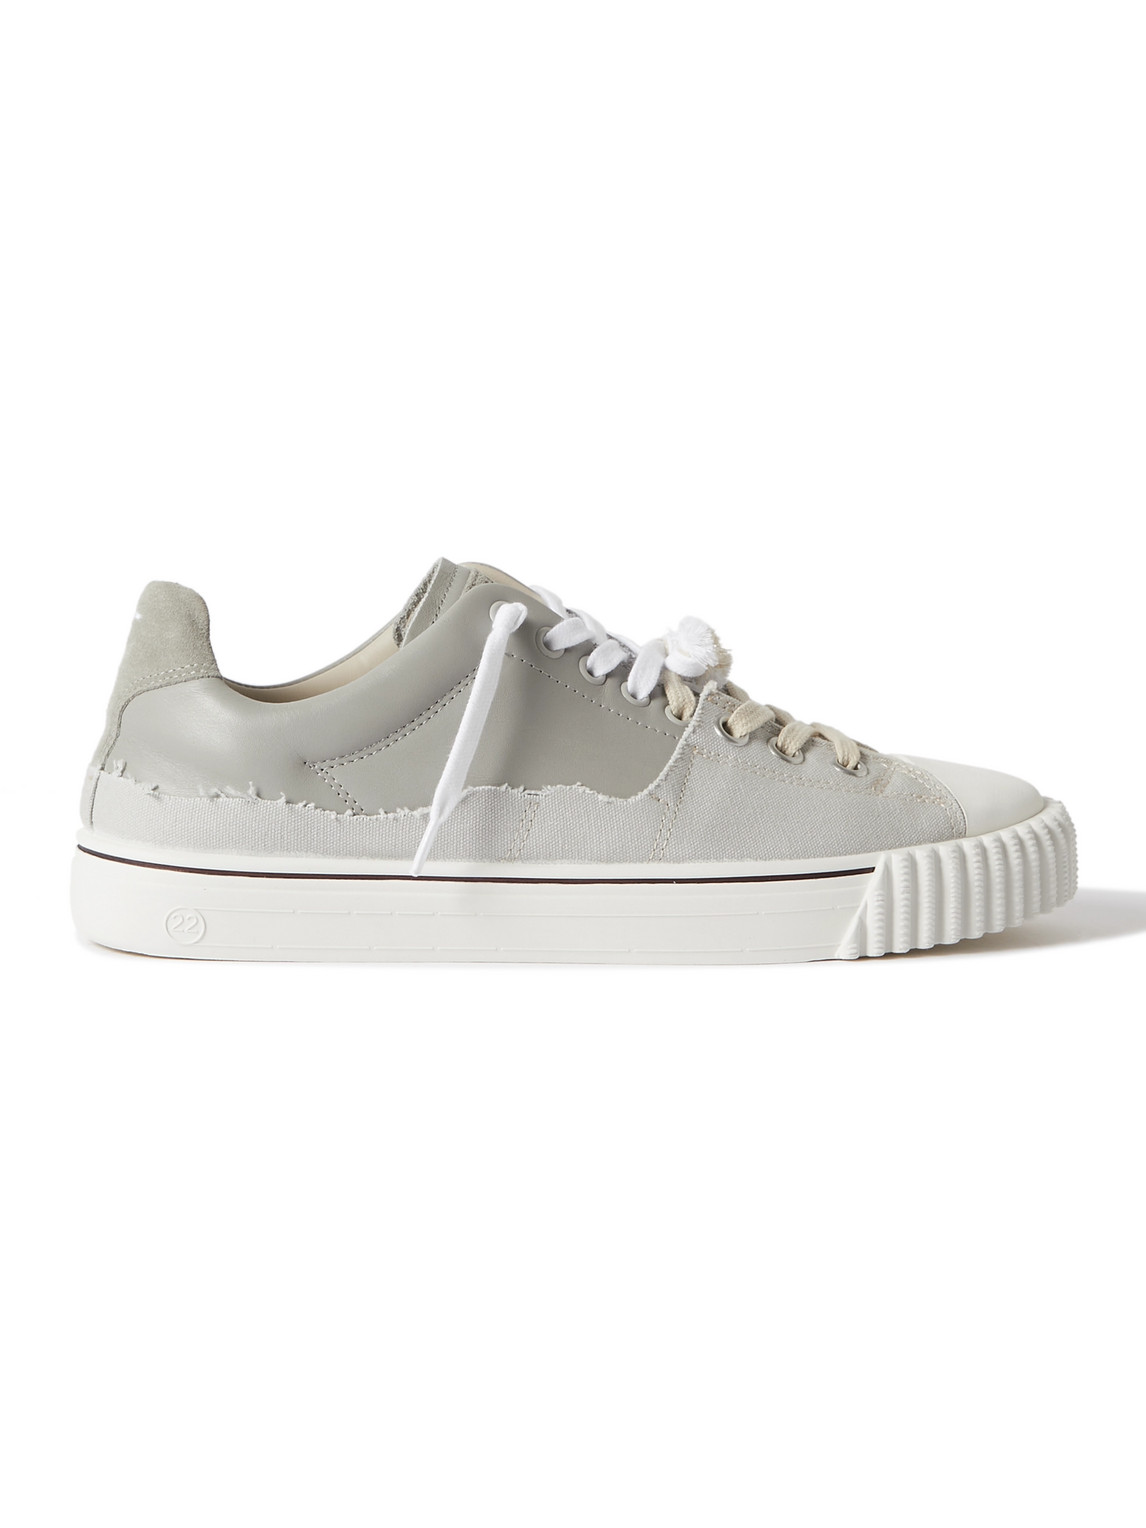 MAISON MARGIELA EVOLUTION DISTRESSED CANVAS AND LEATHER SNEAKERS